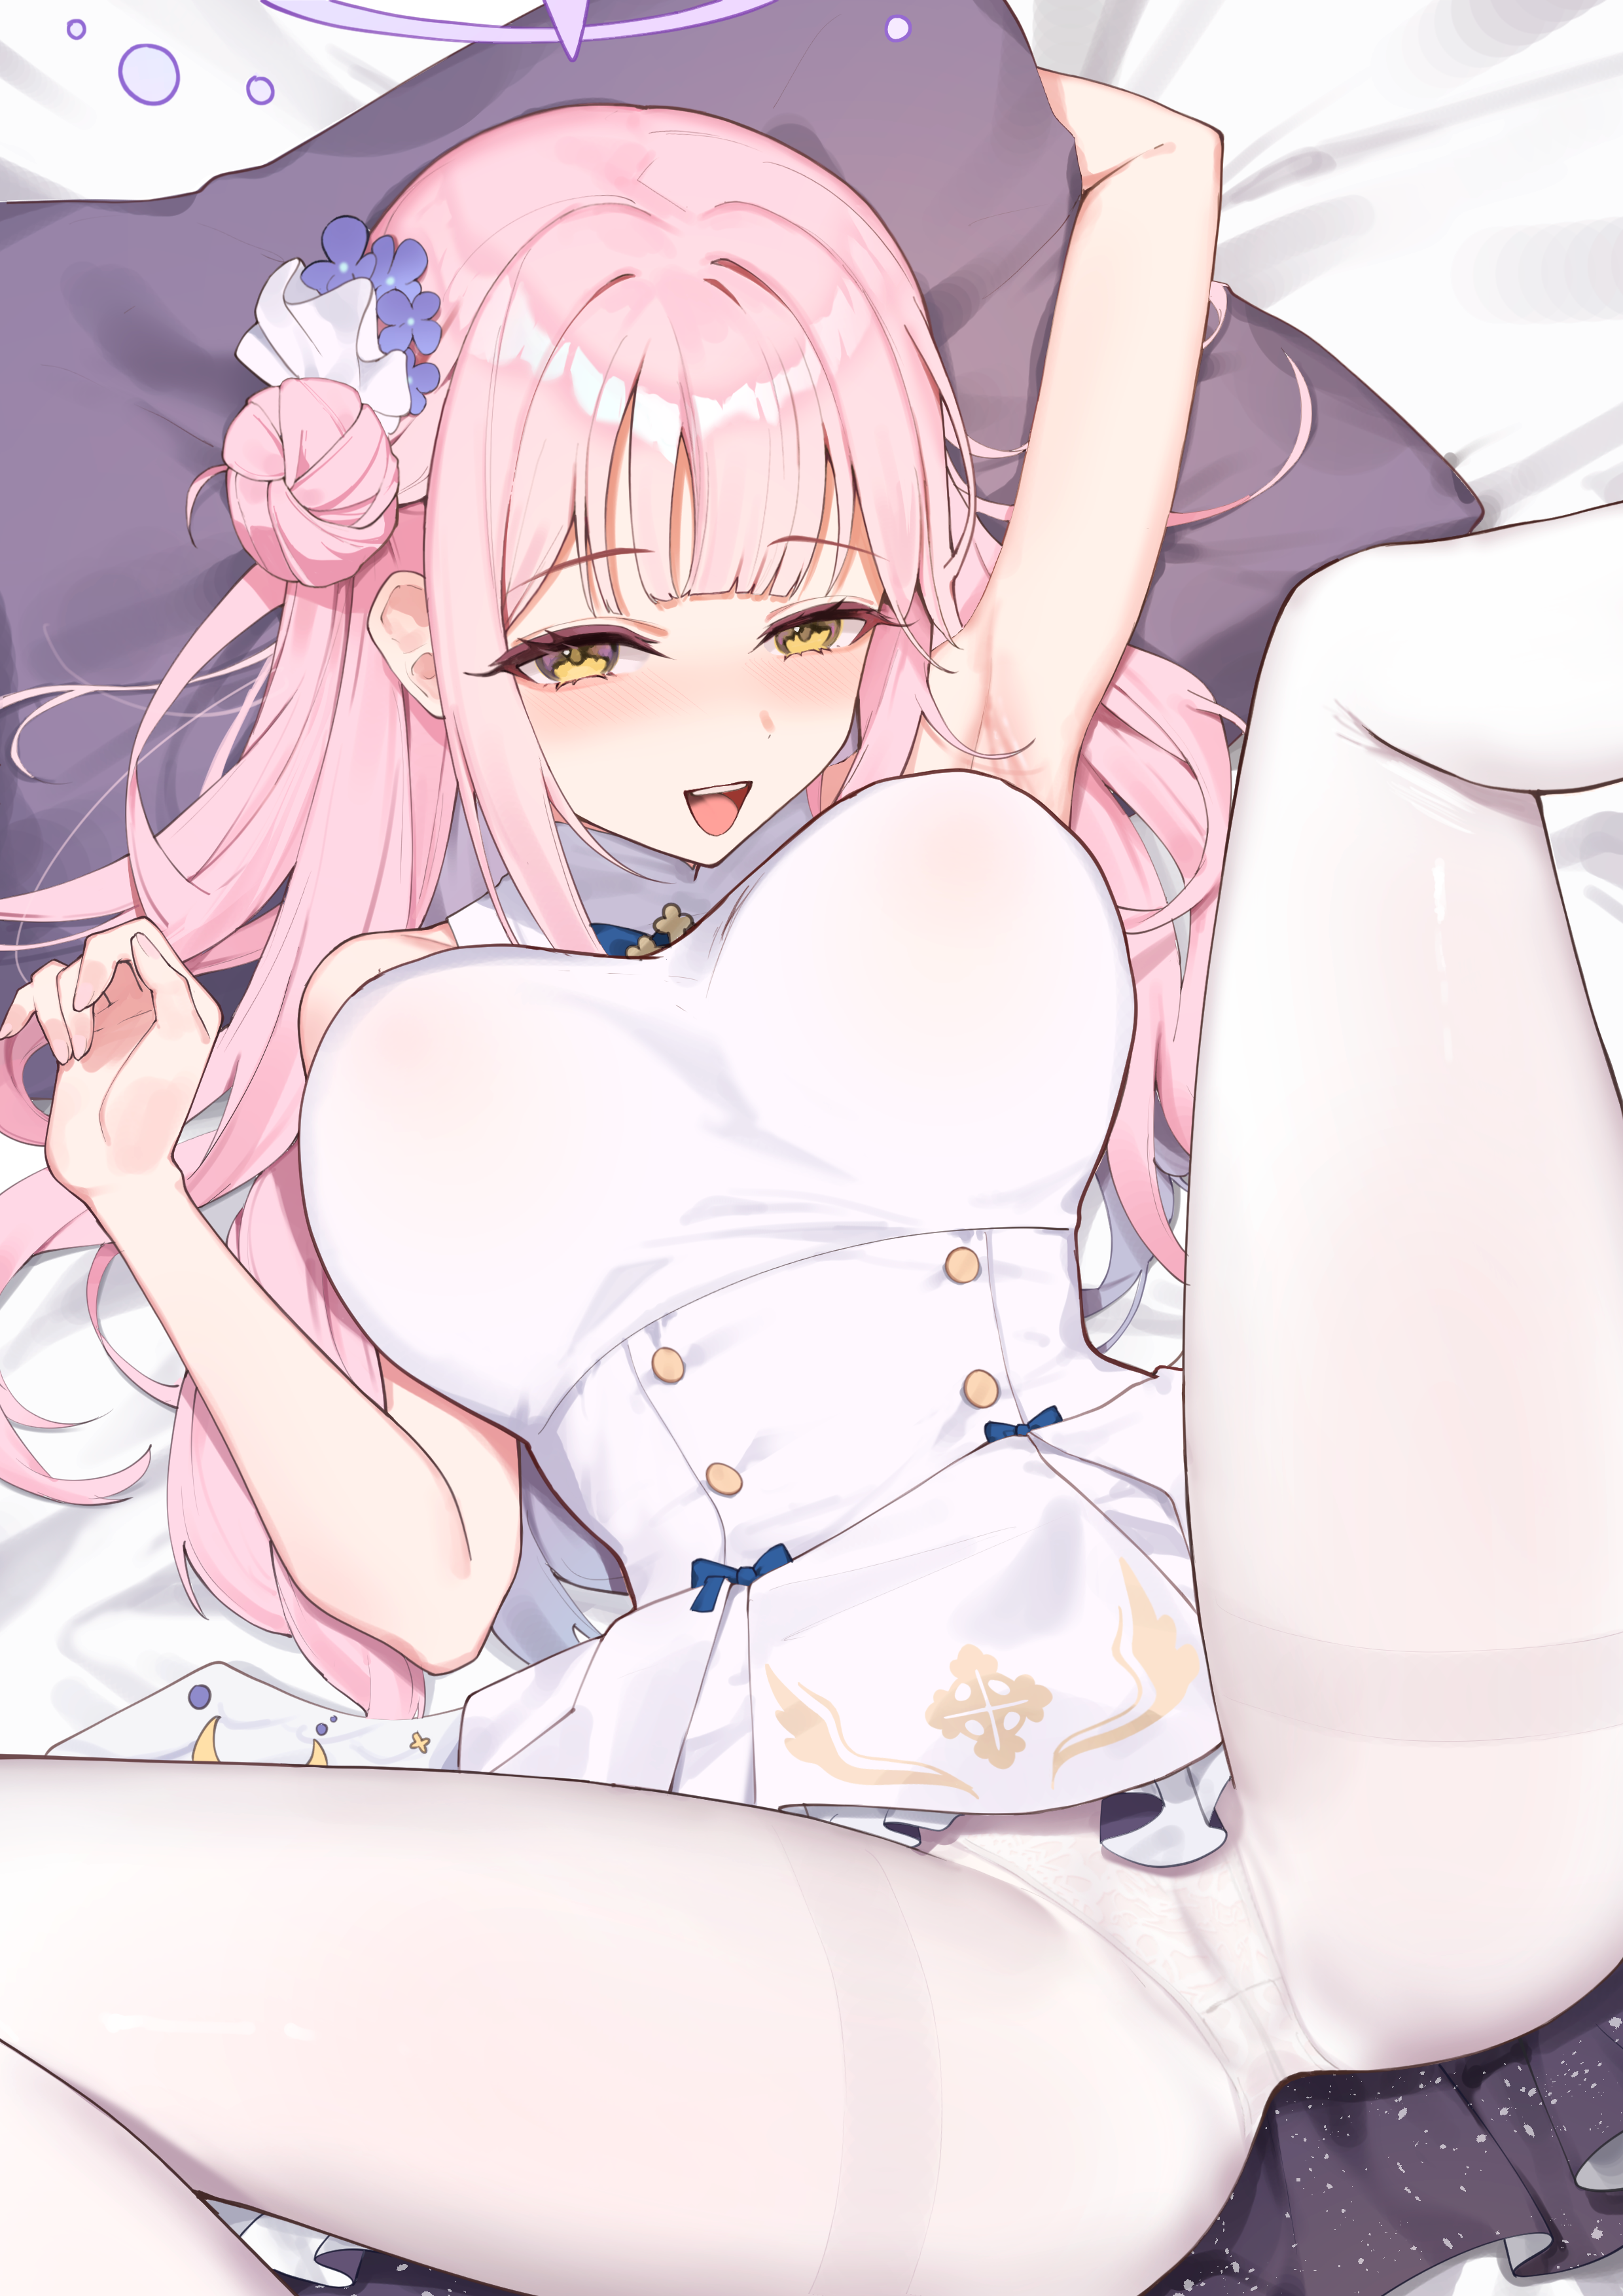 Anime 2480x3508 anime anime girls cameltoe Misono Mika Blue Archive lying down Fang Qiao lying on back looking at viewer blushing open mouth hairbun yellow eyes pink hair flower in hair one arm up long hair spread legs pantyhose big boobs pillow skirt frills anime girl with wings wings portrait display